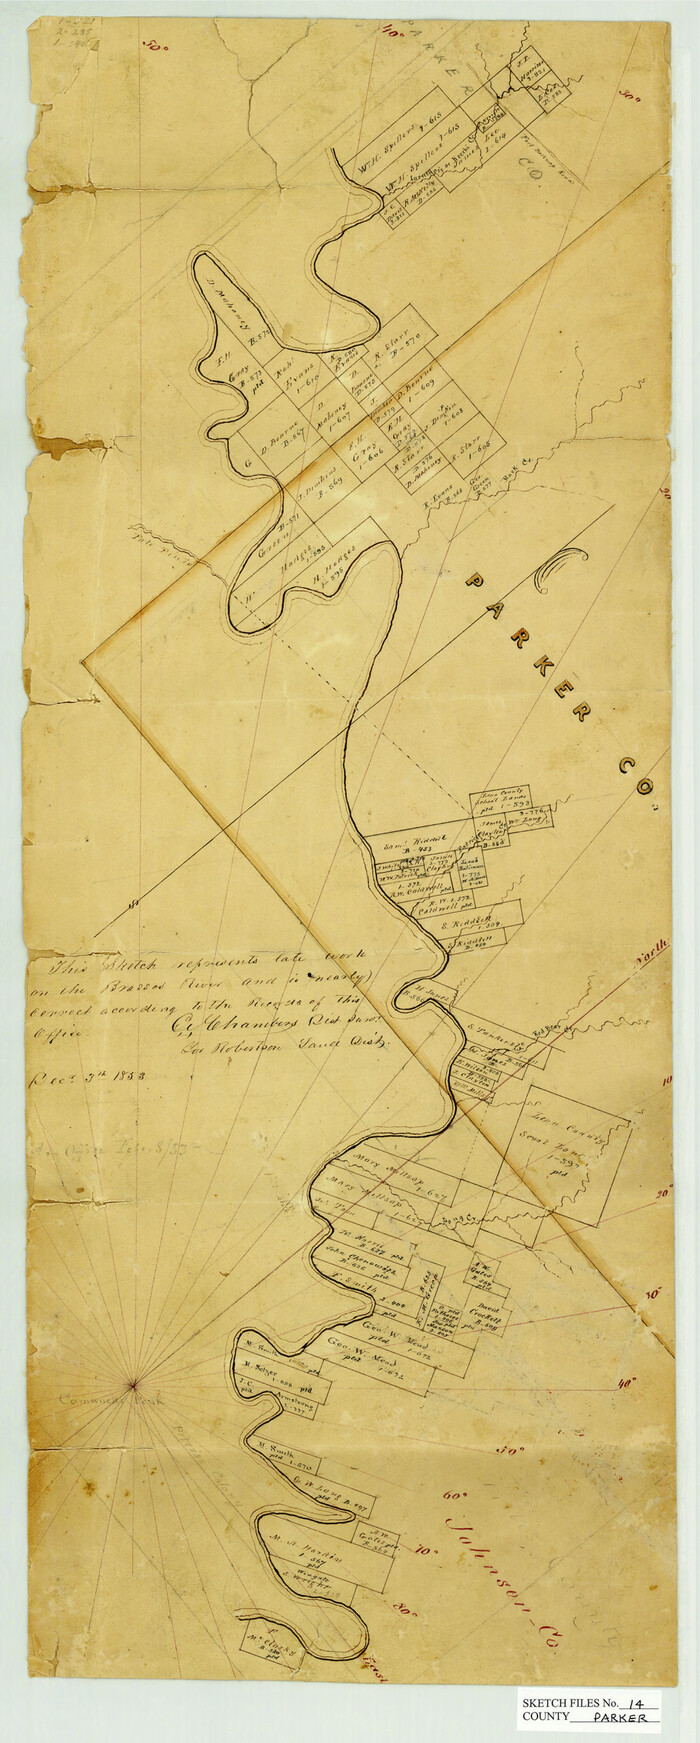 12143, Parker County Sketch File 14, General Map Collection